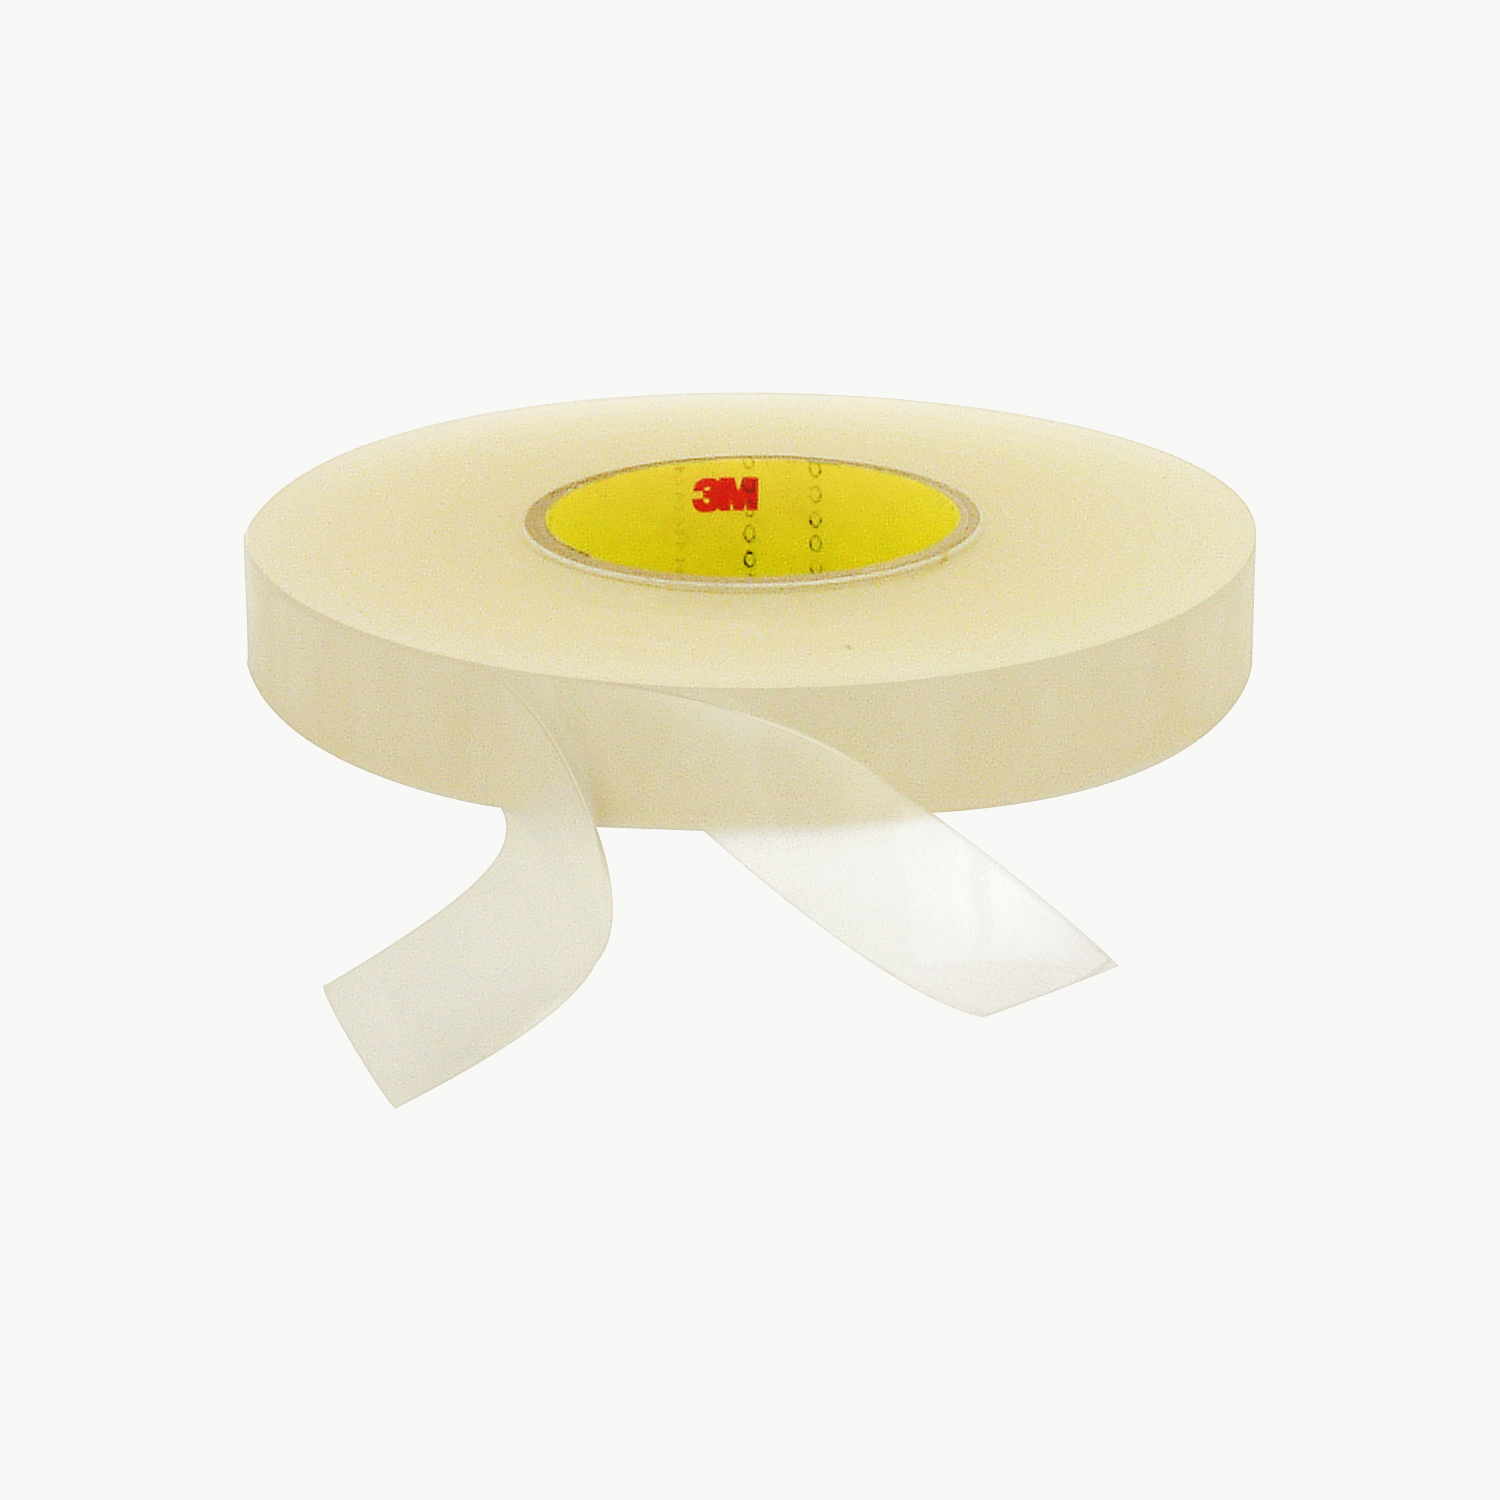 3M Double-Sided Removable Foam Tape (4658F)